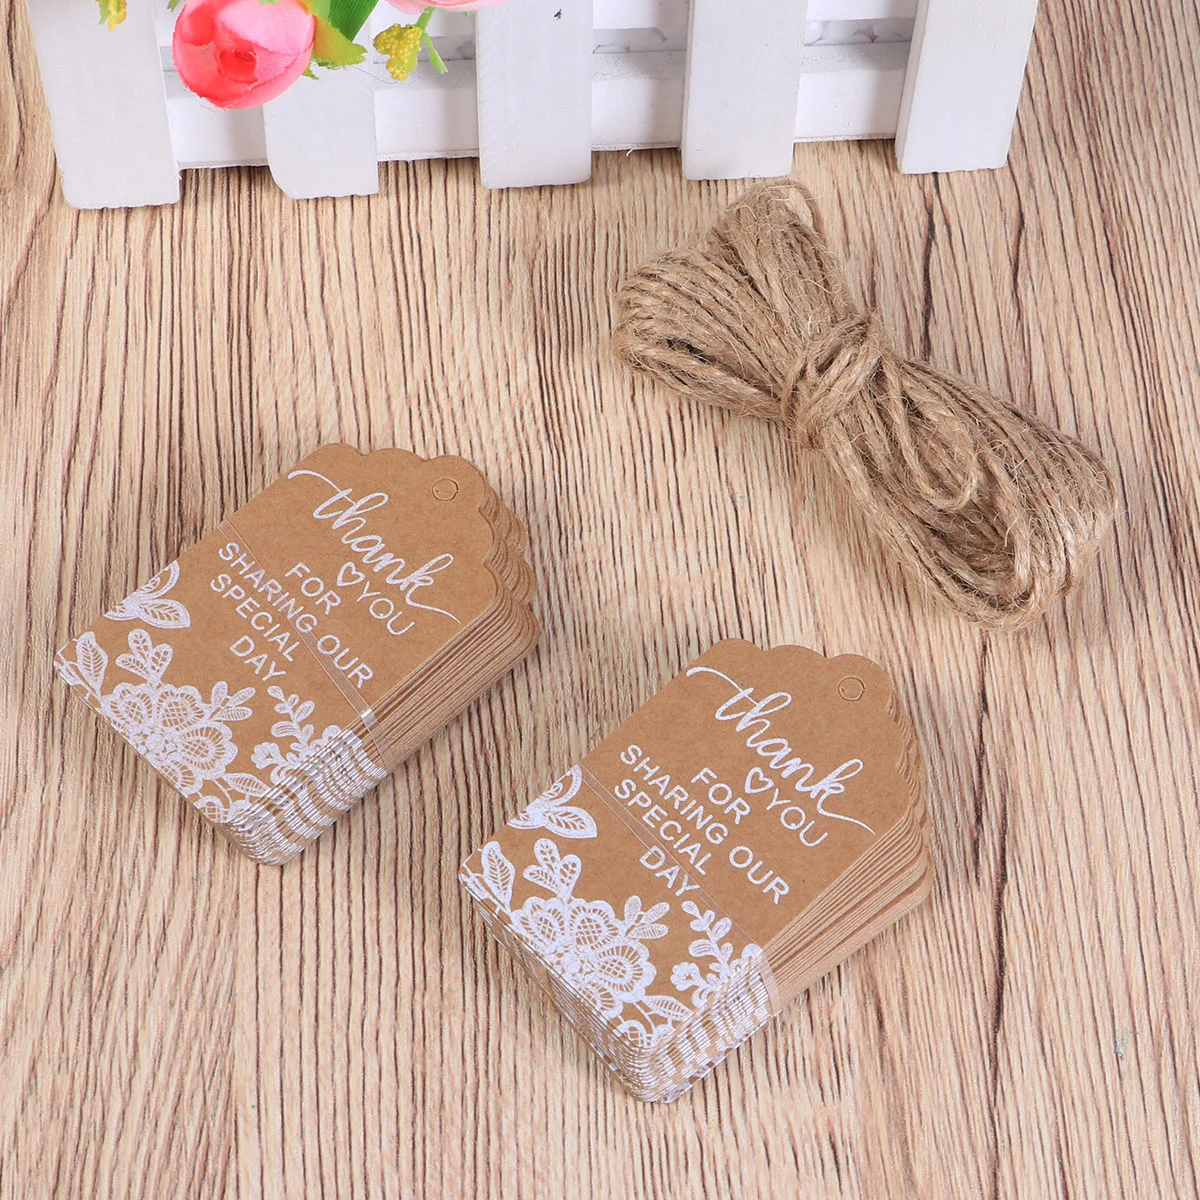 

Tags Wedding Kraft Paper Gift Vintage Thank You Party Hanging Tag Favors Brown Favor Luggage String Multiuse Printed Rectangular